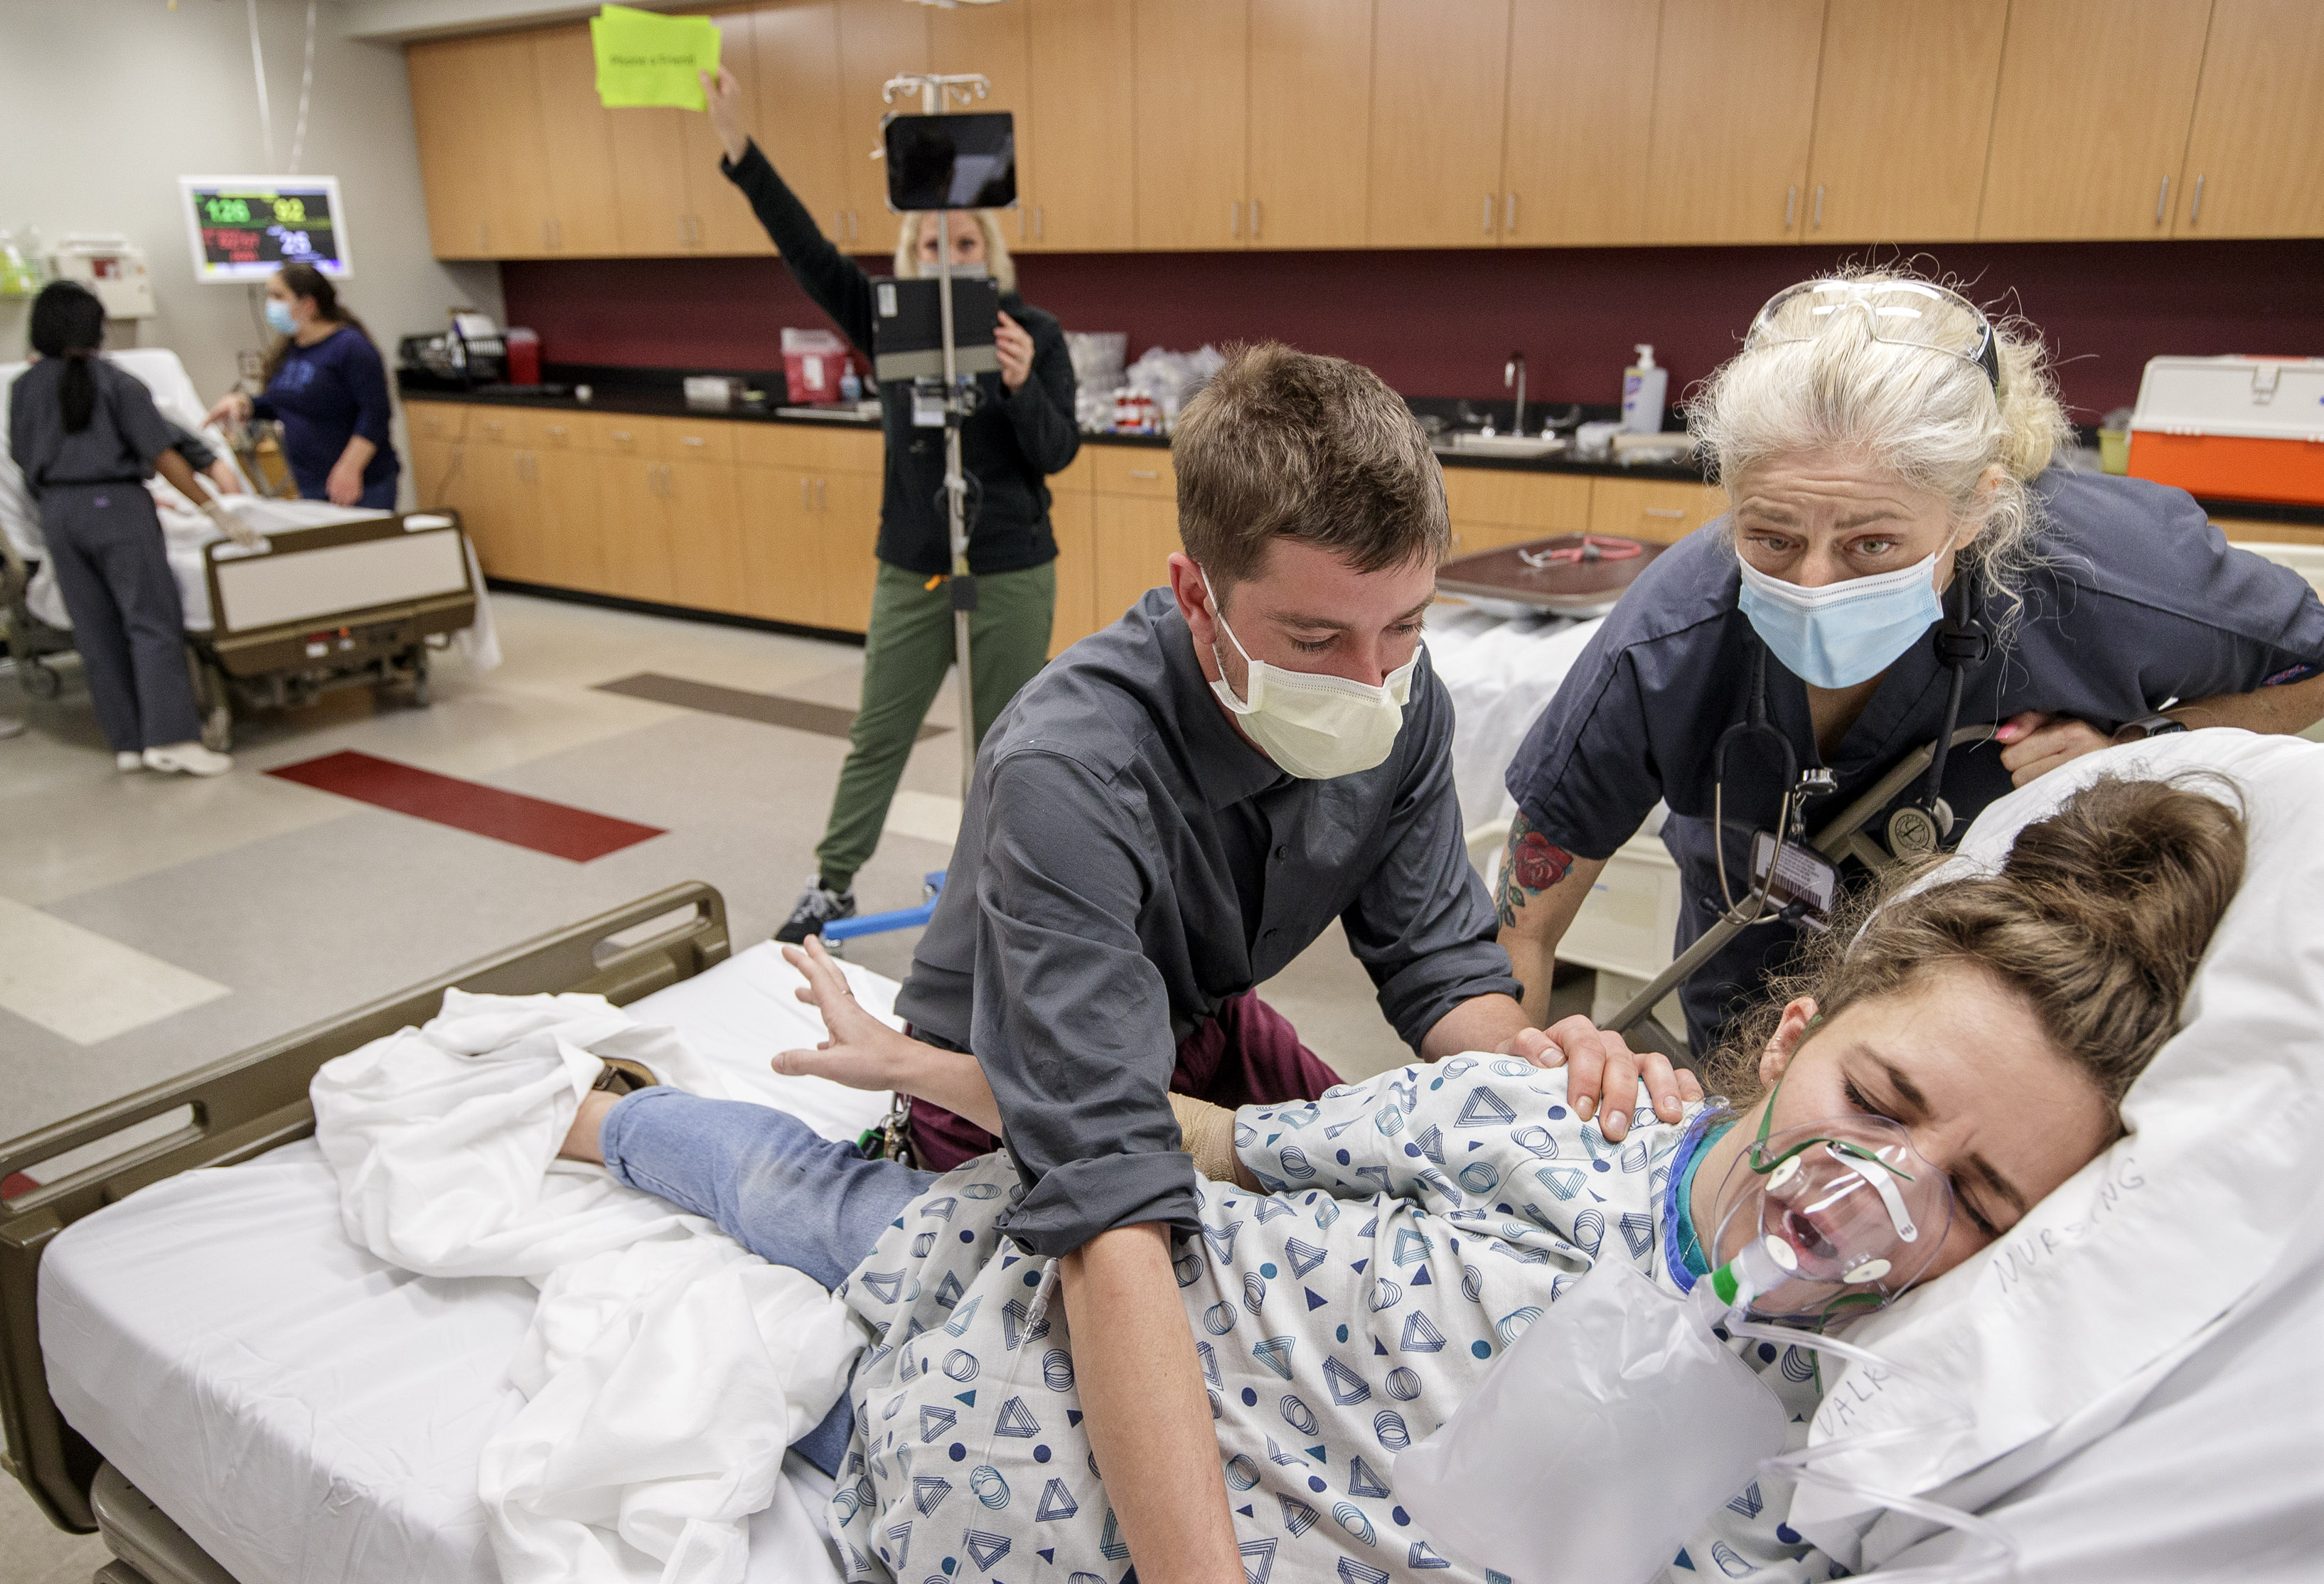 Senior nursing students in the UA Little Rock School of Nursing prepare for transition to practice by participating in an Emergency Room simulation in the Center for Simulation Innovation. Photo by Ben Krain.